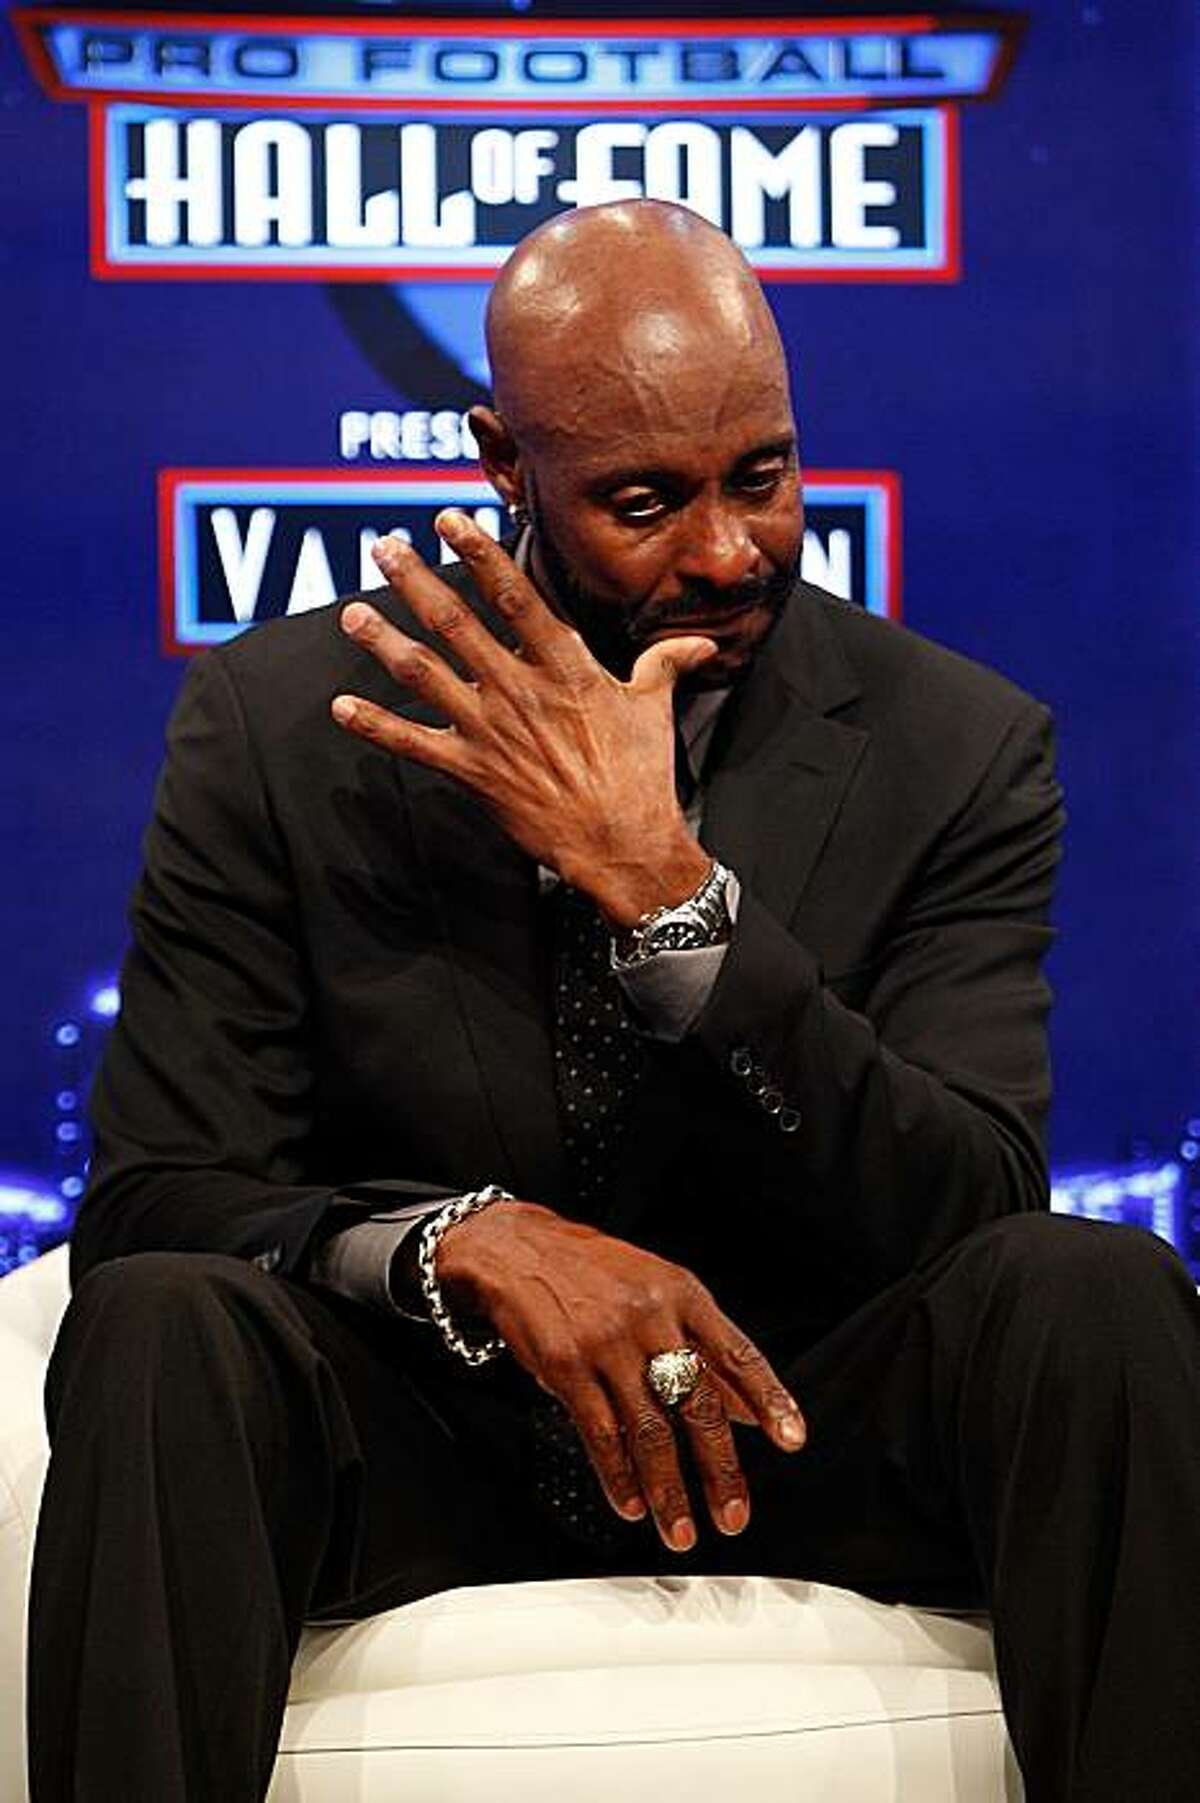 FORT LAUDERDALE, FL - FEBRUARY 06: Jerry Rice is overcome with emotion for a moment after he was announced as one of the newest enshrinees into the Hall of Fameduring the Pro Football Hall of Fame Class of 2010 Press Conference held at the Greater Ft. Lauderdale/Broward County Convention Center as part of media week for Super Bowl XLIV on February 6, 2010 in Fort Lauderdale, Florida.